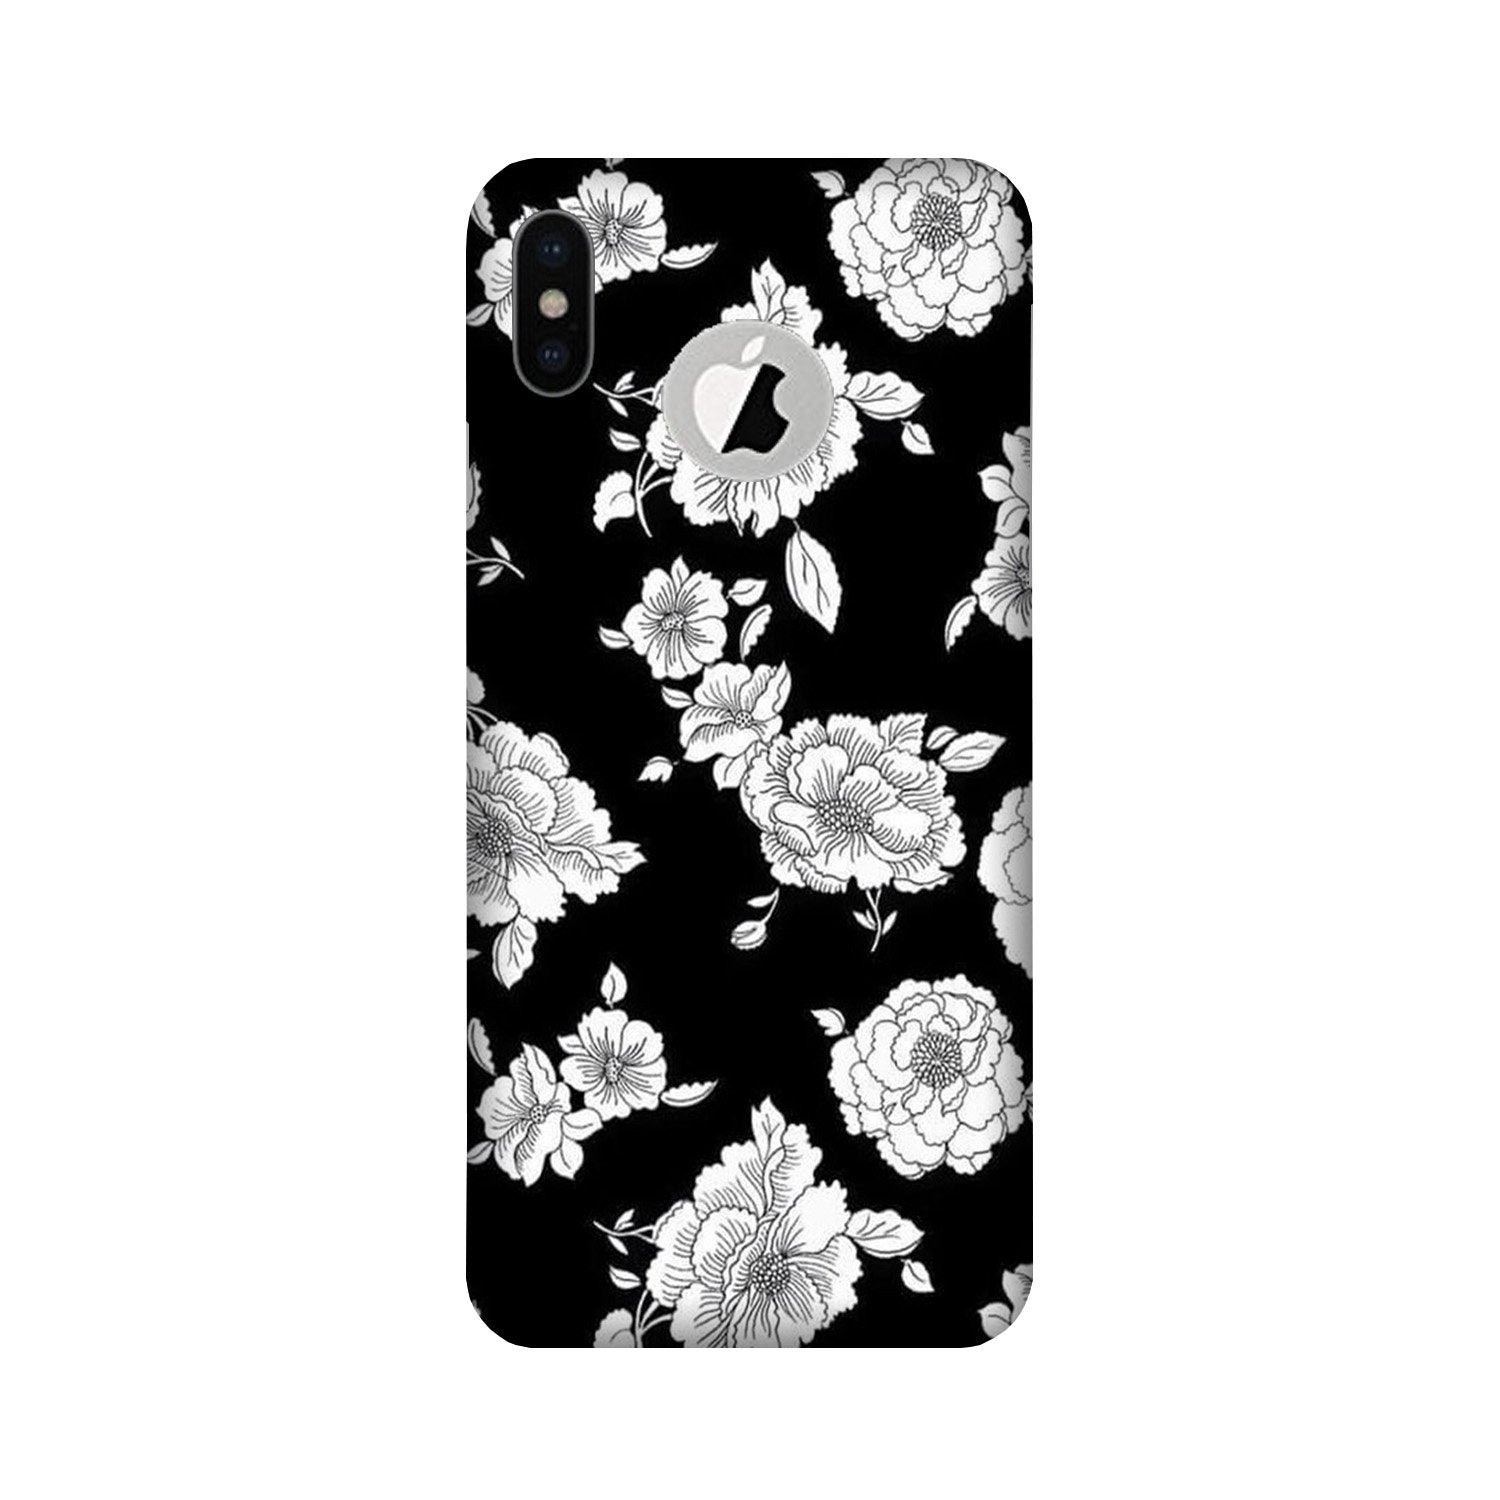 White flowers Black Background Case for iPhone Xs logo cut 